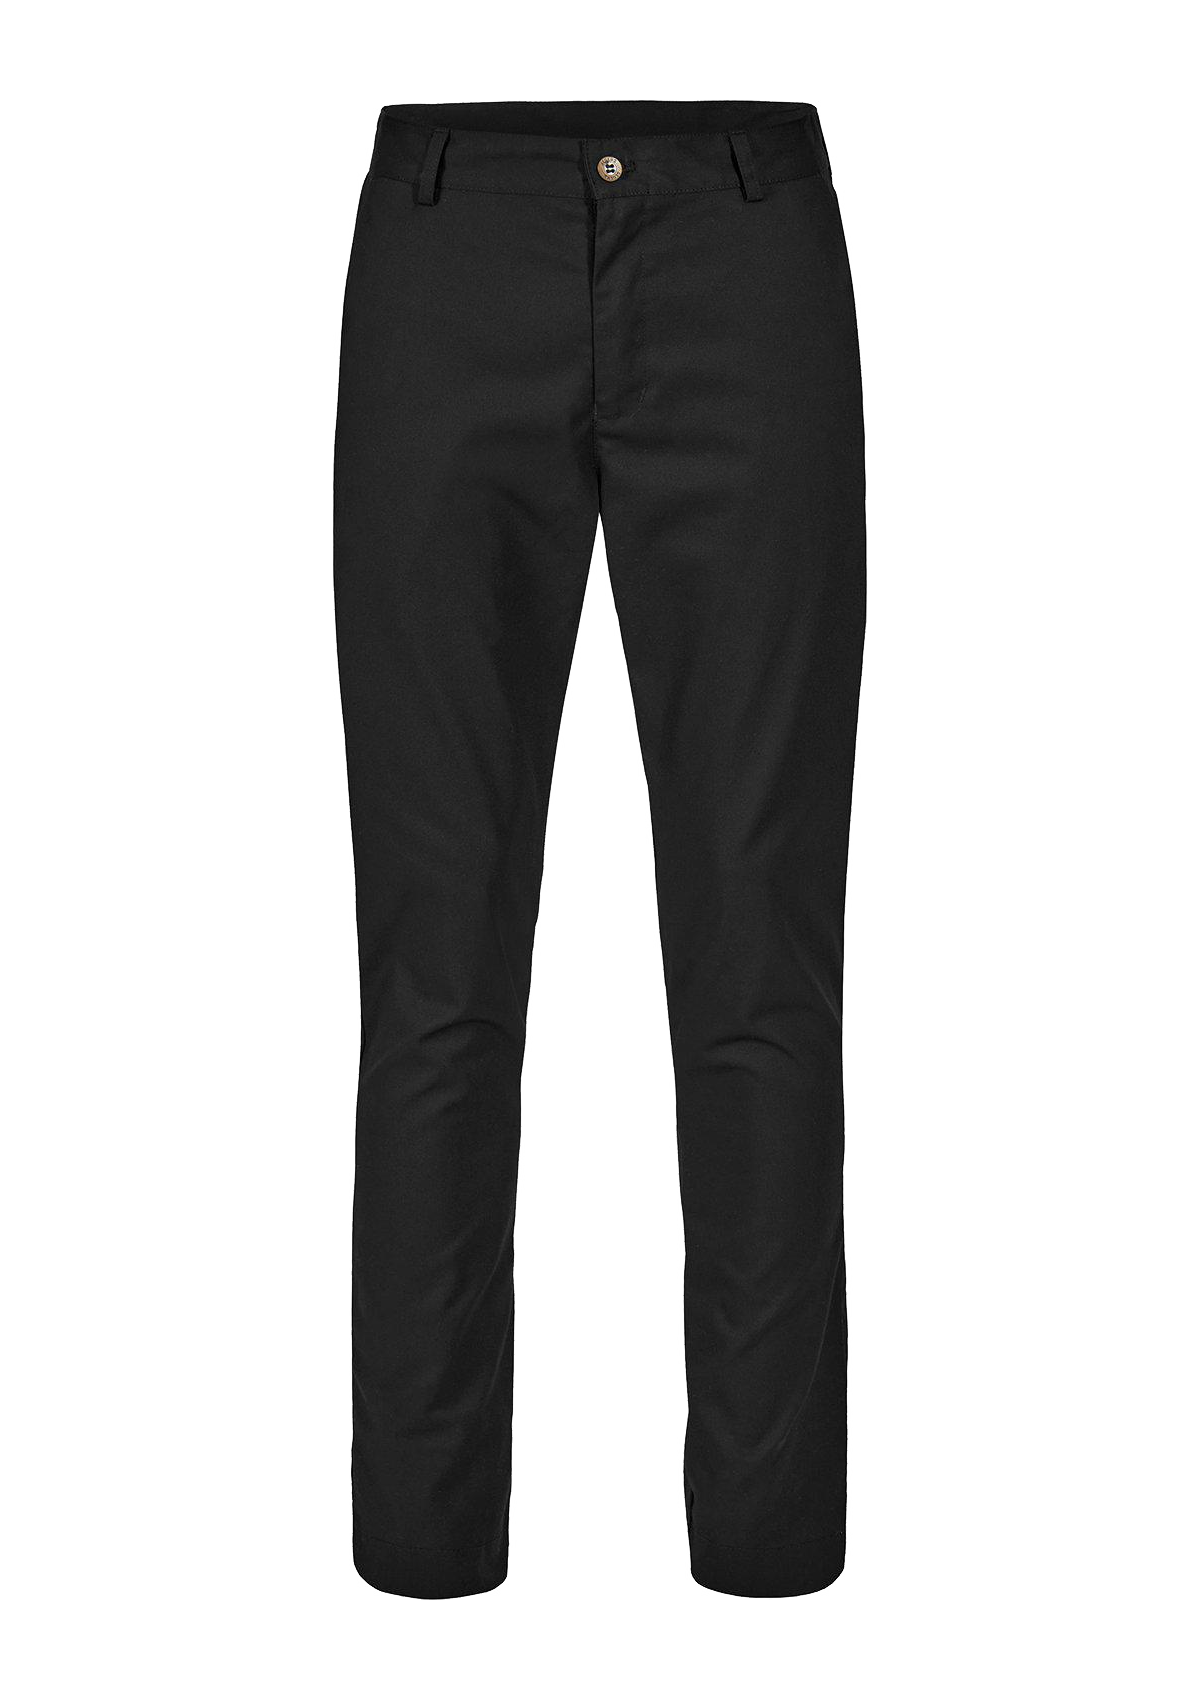 Chino-Style Trousers For Men